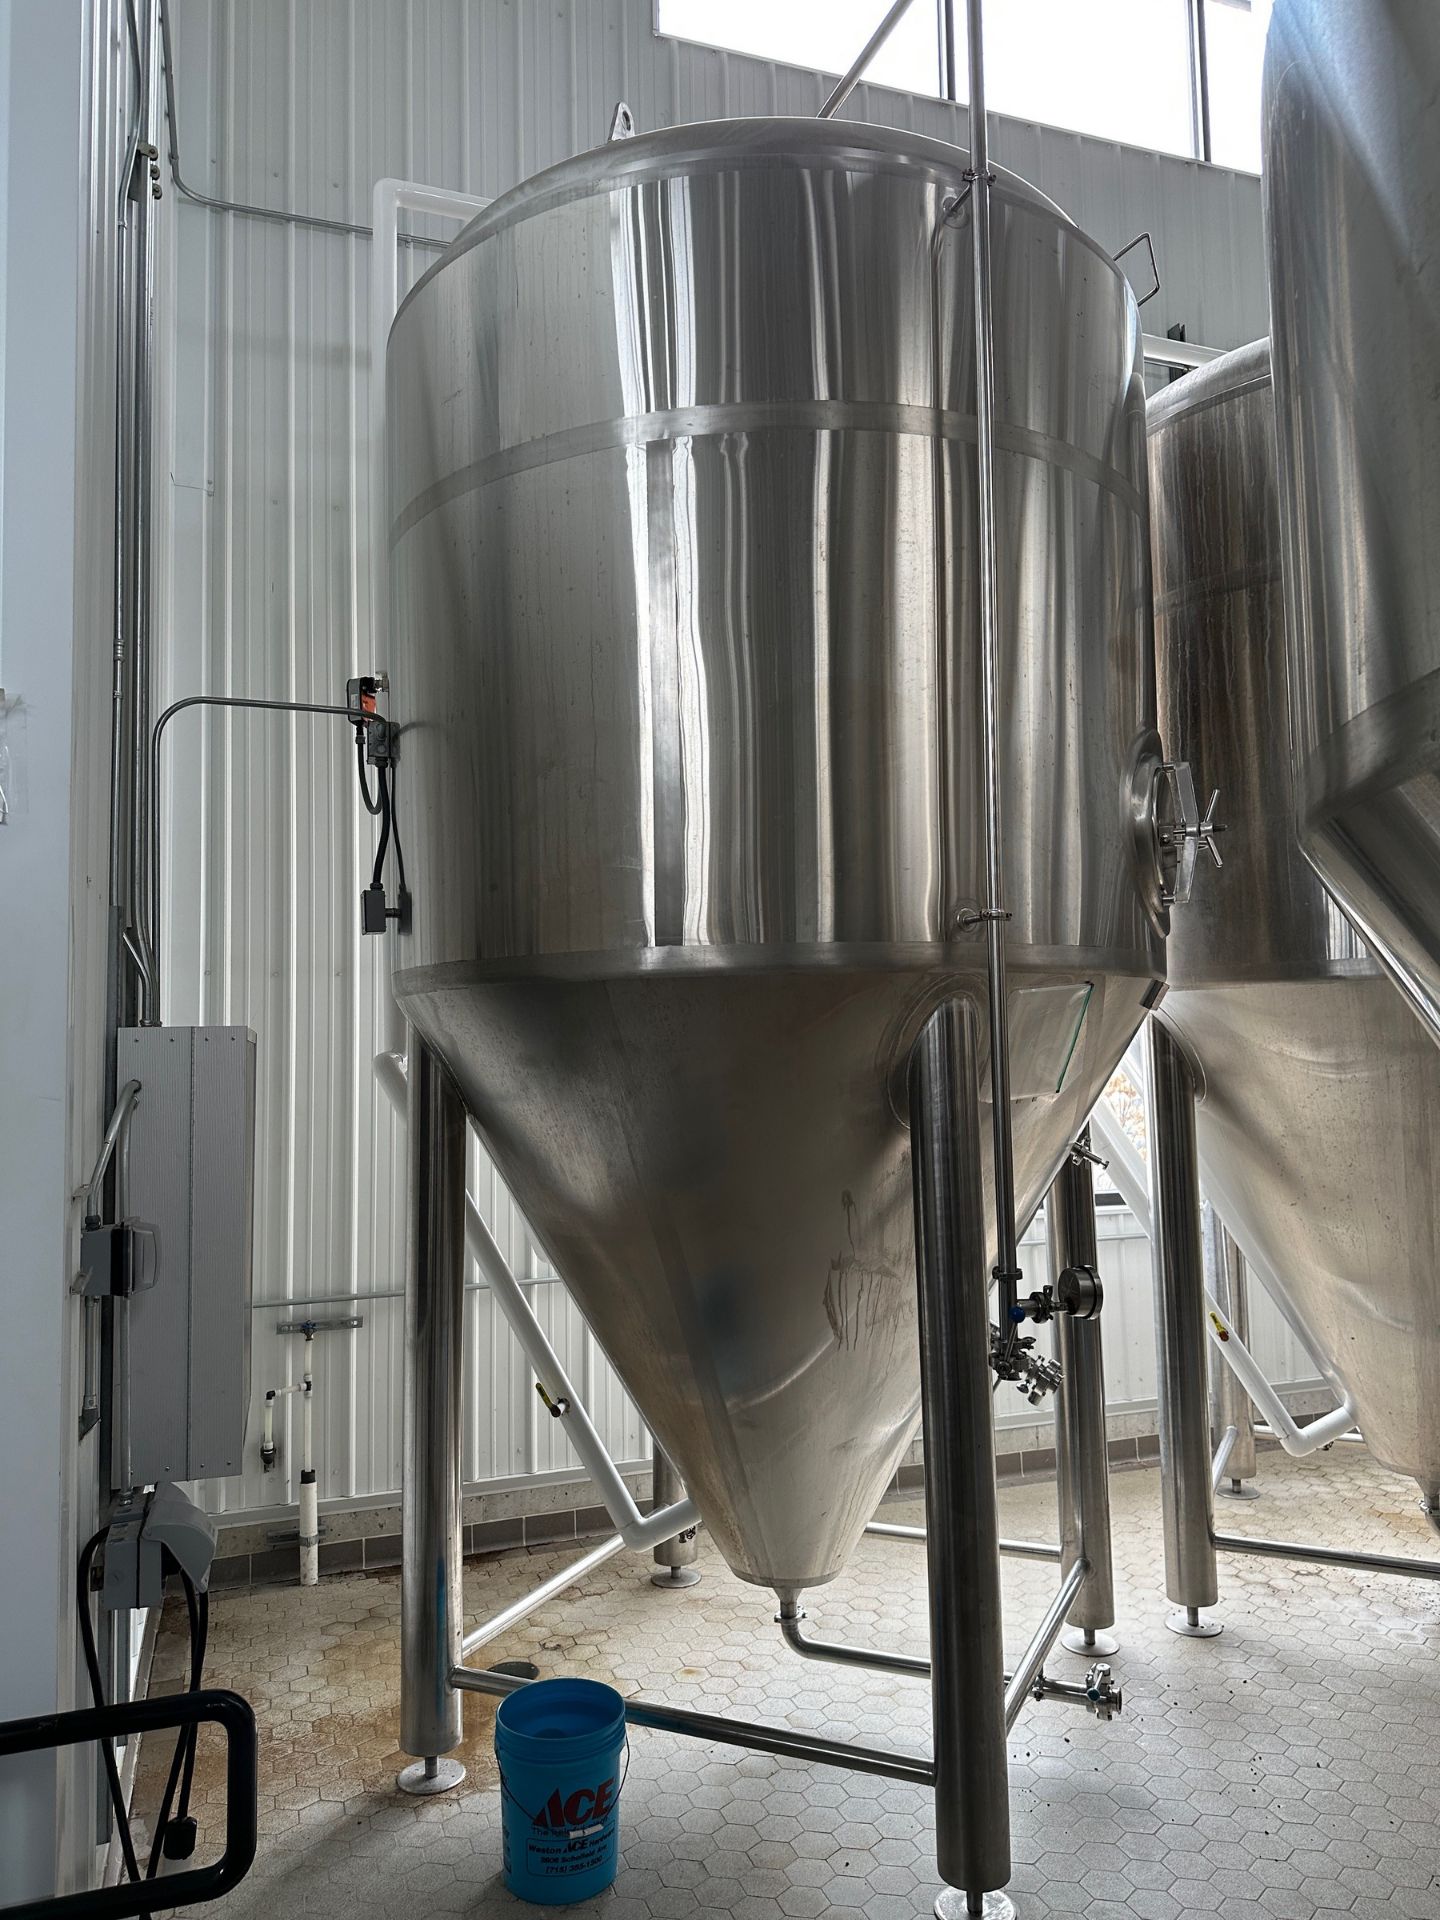 DME 60 BBL Stainless Steel Fermentation Tank - Cone Bottom, Glycol Jacketed, Mandoor, Zwickel Valve, - Image 2 of 4